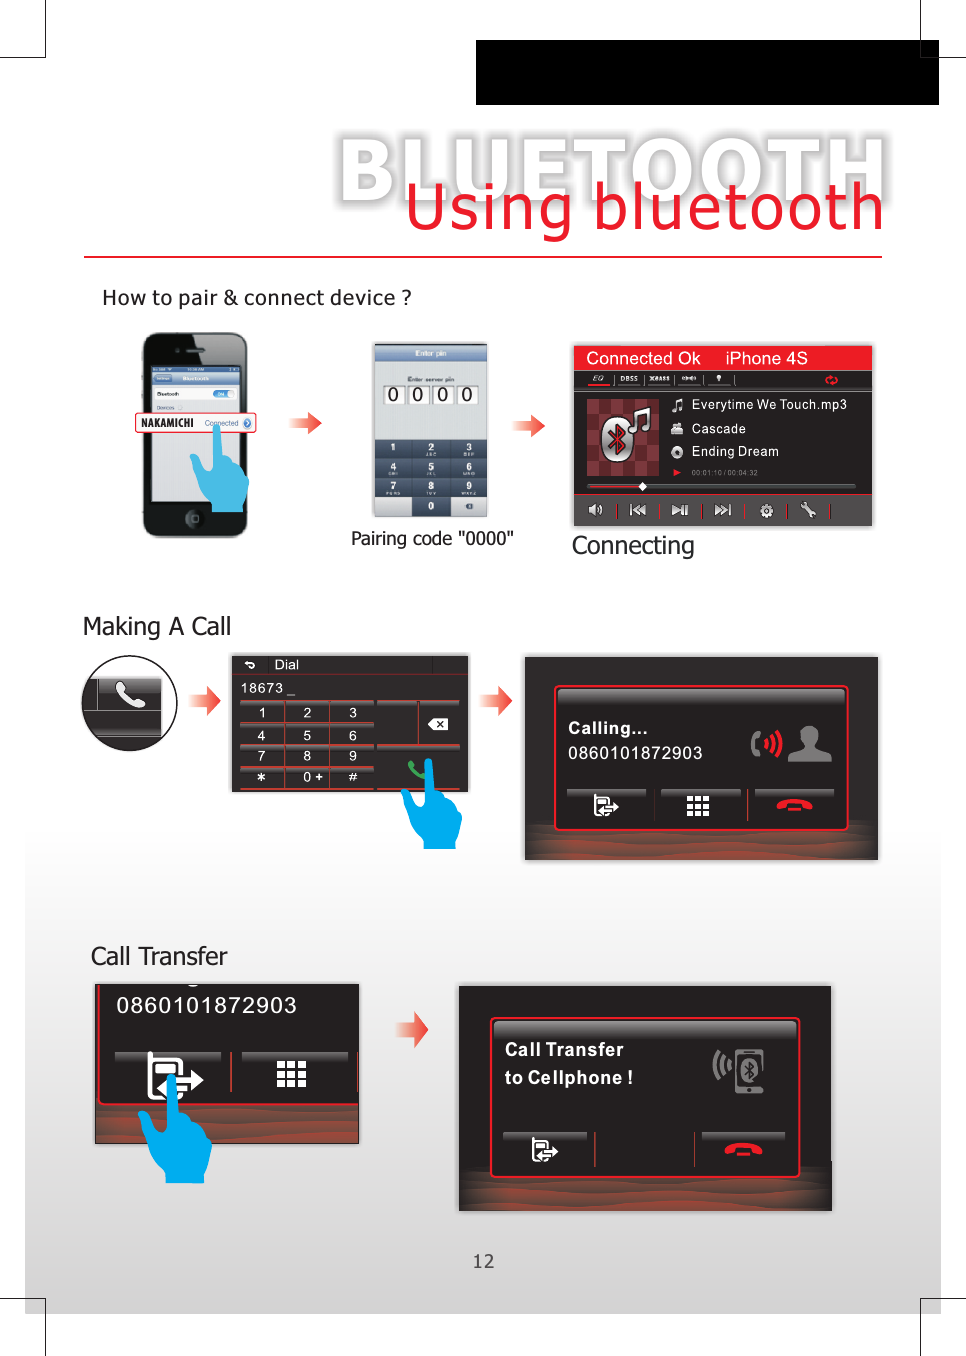 BLUETOOTH12Using bluetoothPairing code &quot;0000&quot;How to pair &amp; connect device ?Making A CallNAKAMICHICall Transferto Ce llphone !Call TransferConnecting Calling...08601018729030 0 0 0Calling...0860101872903